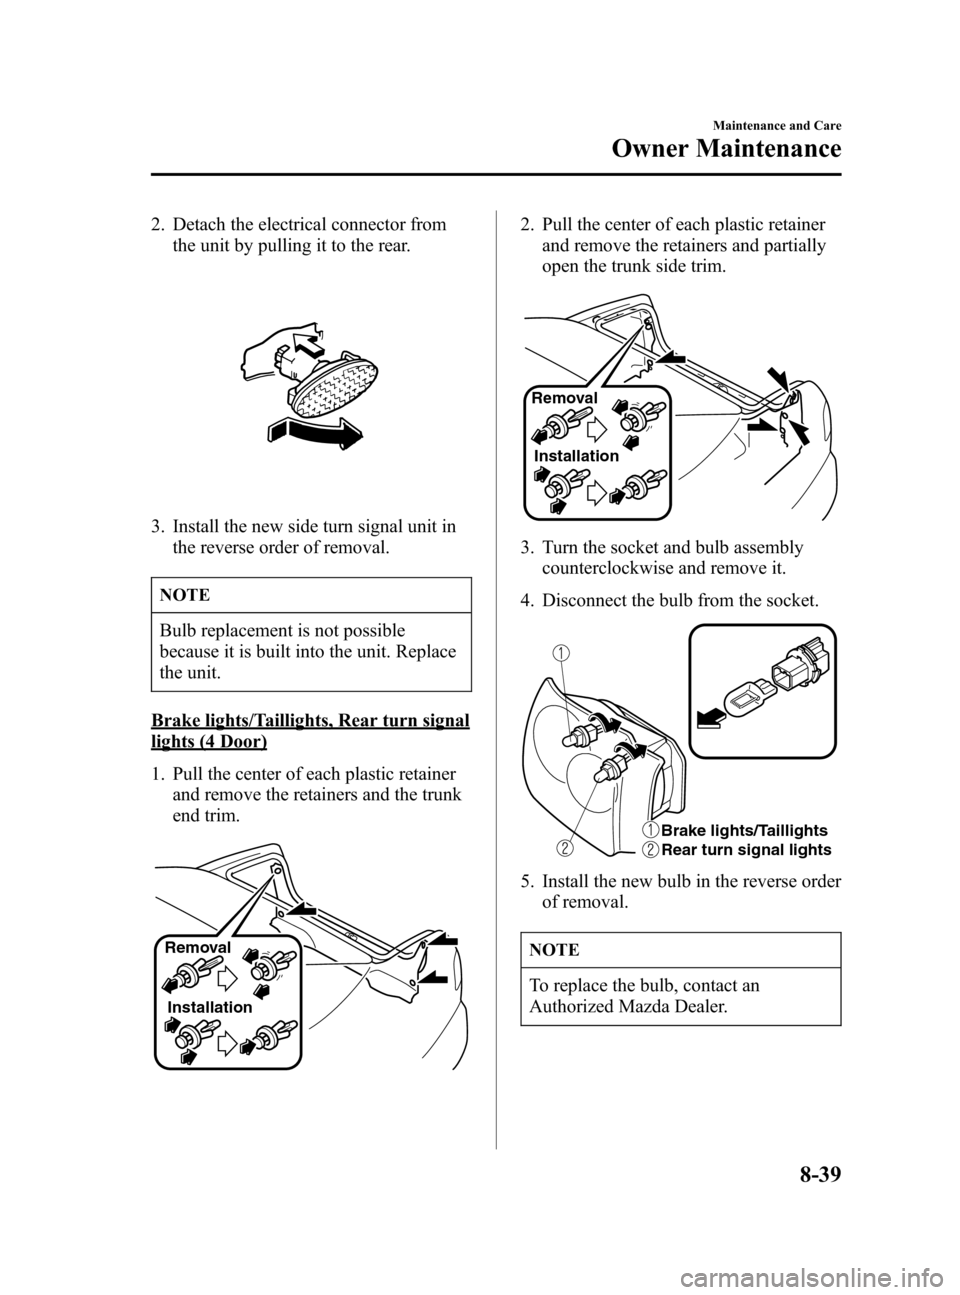 MAZDA MODEL 3 HATCHBACK 2005  Owners Manual (in English) Black plate (269,1)
2. Detach the electrical connector from
the unit by pulling it to the rear.
3. Install the new side turn signal unit in
the reverse order of removal.
NOTE
Bulb replacement is not p